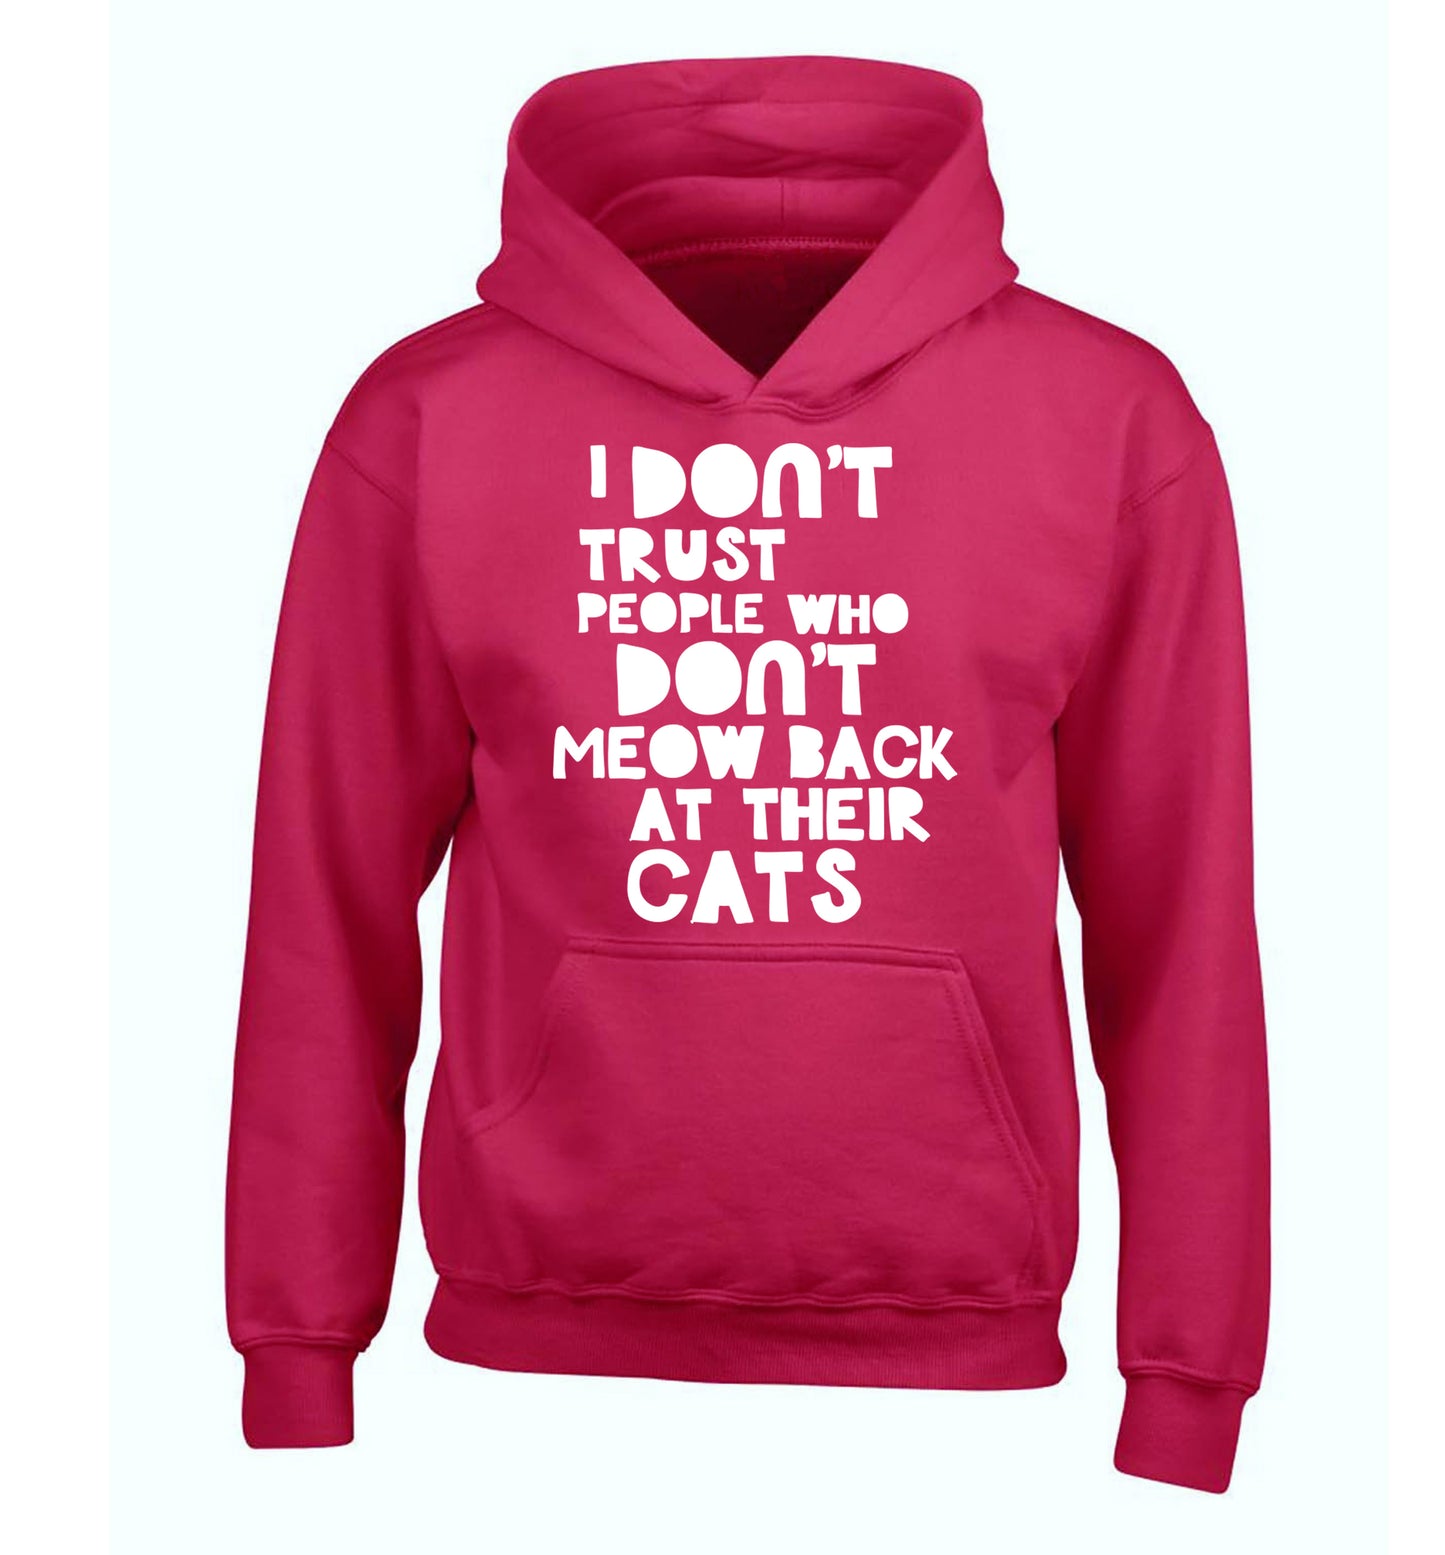 I don't trust people who don't meow back at their cats children's pink hoodie 12-13 Years